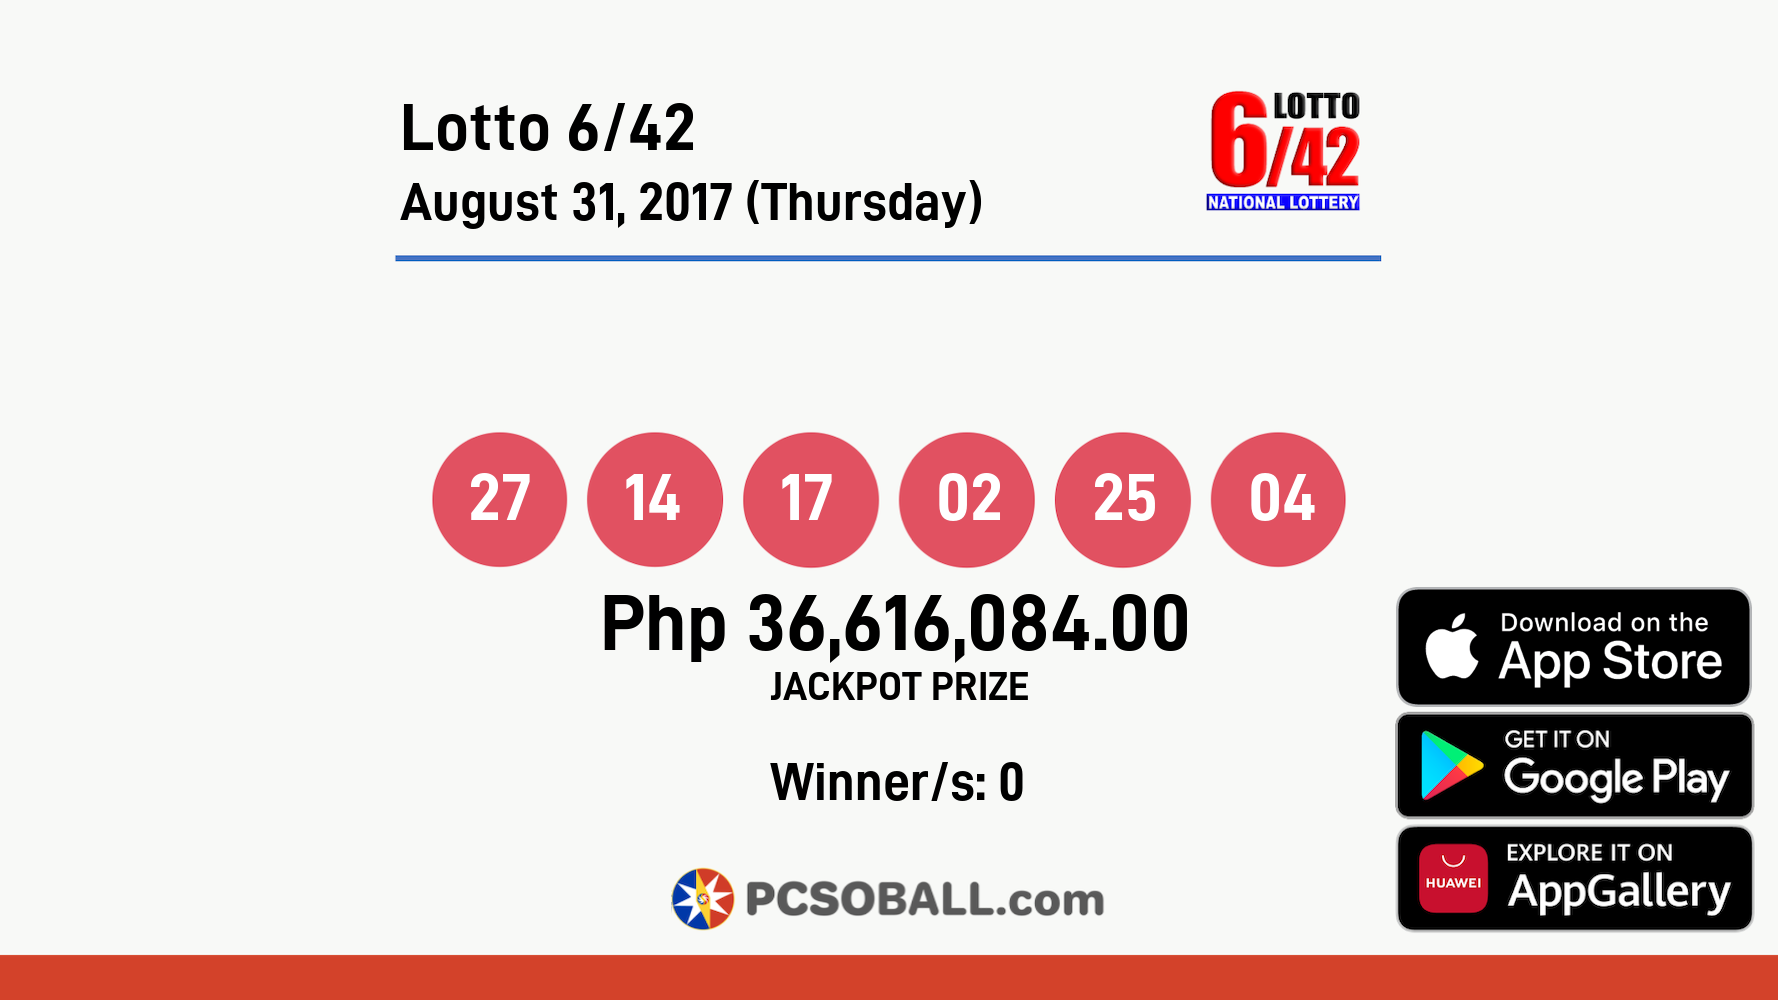 Lotto 6/42 August 31, 2017 (Thursday) Result